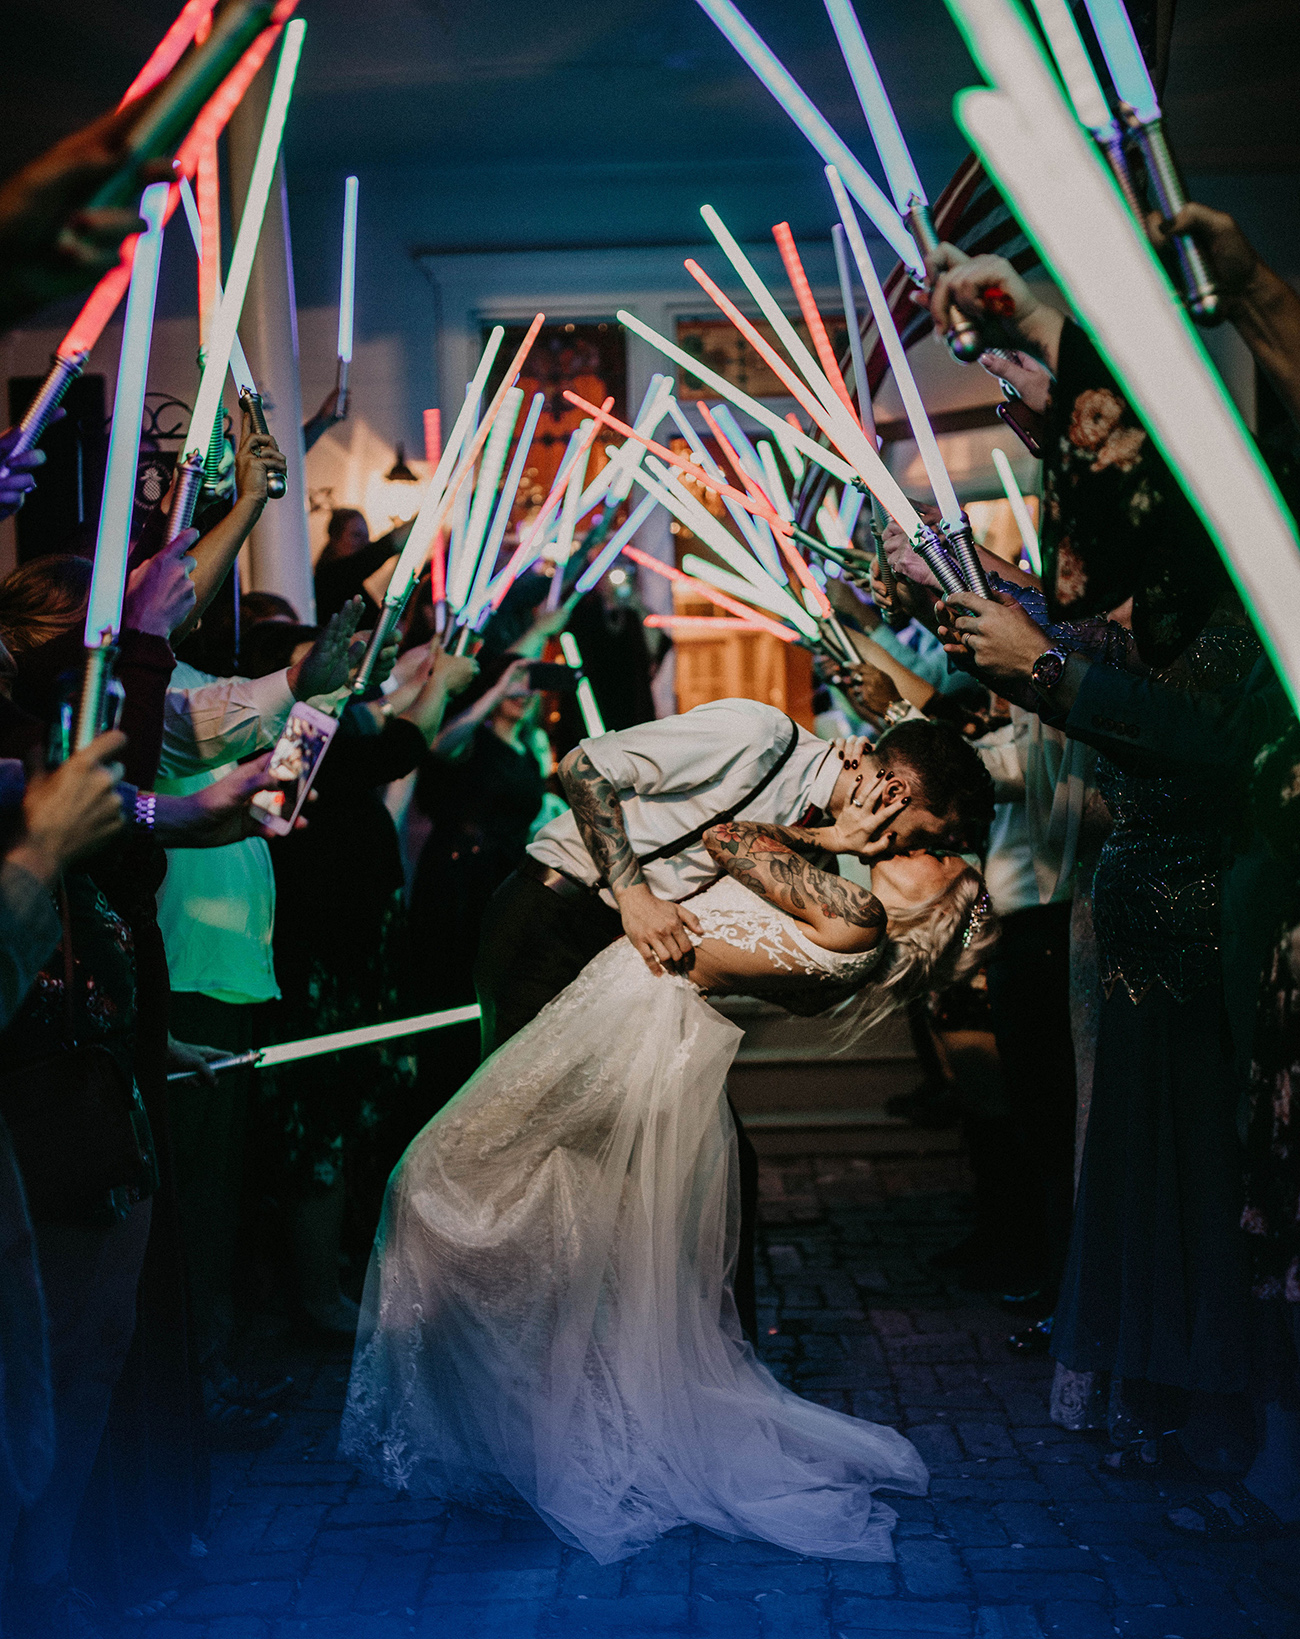 Star Wars Wedding exit with lightsabers